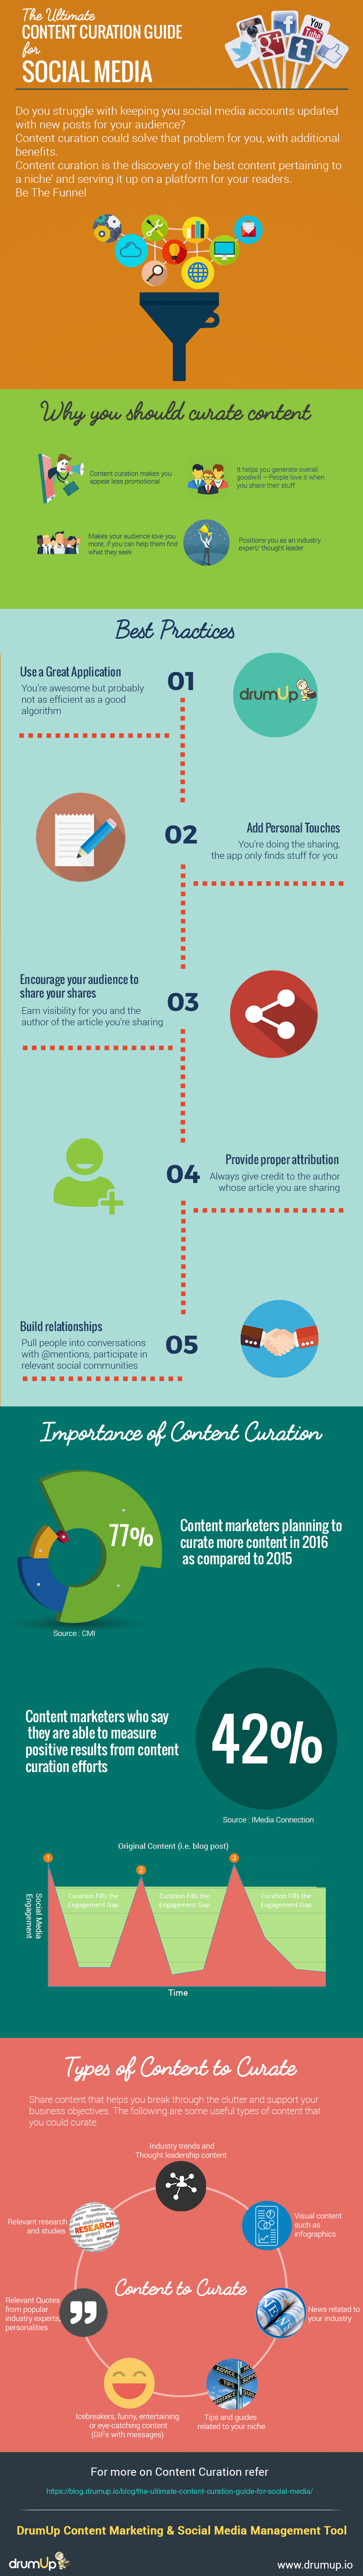 Content-curation-infographic-2